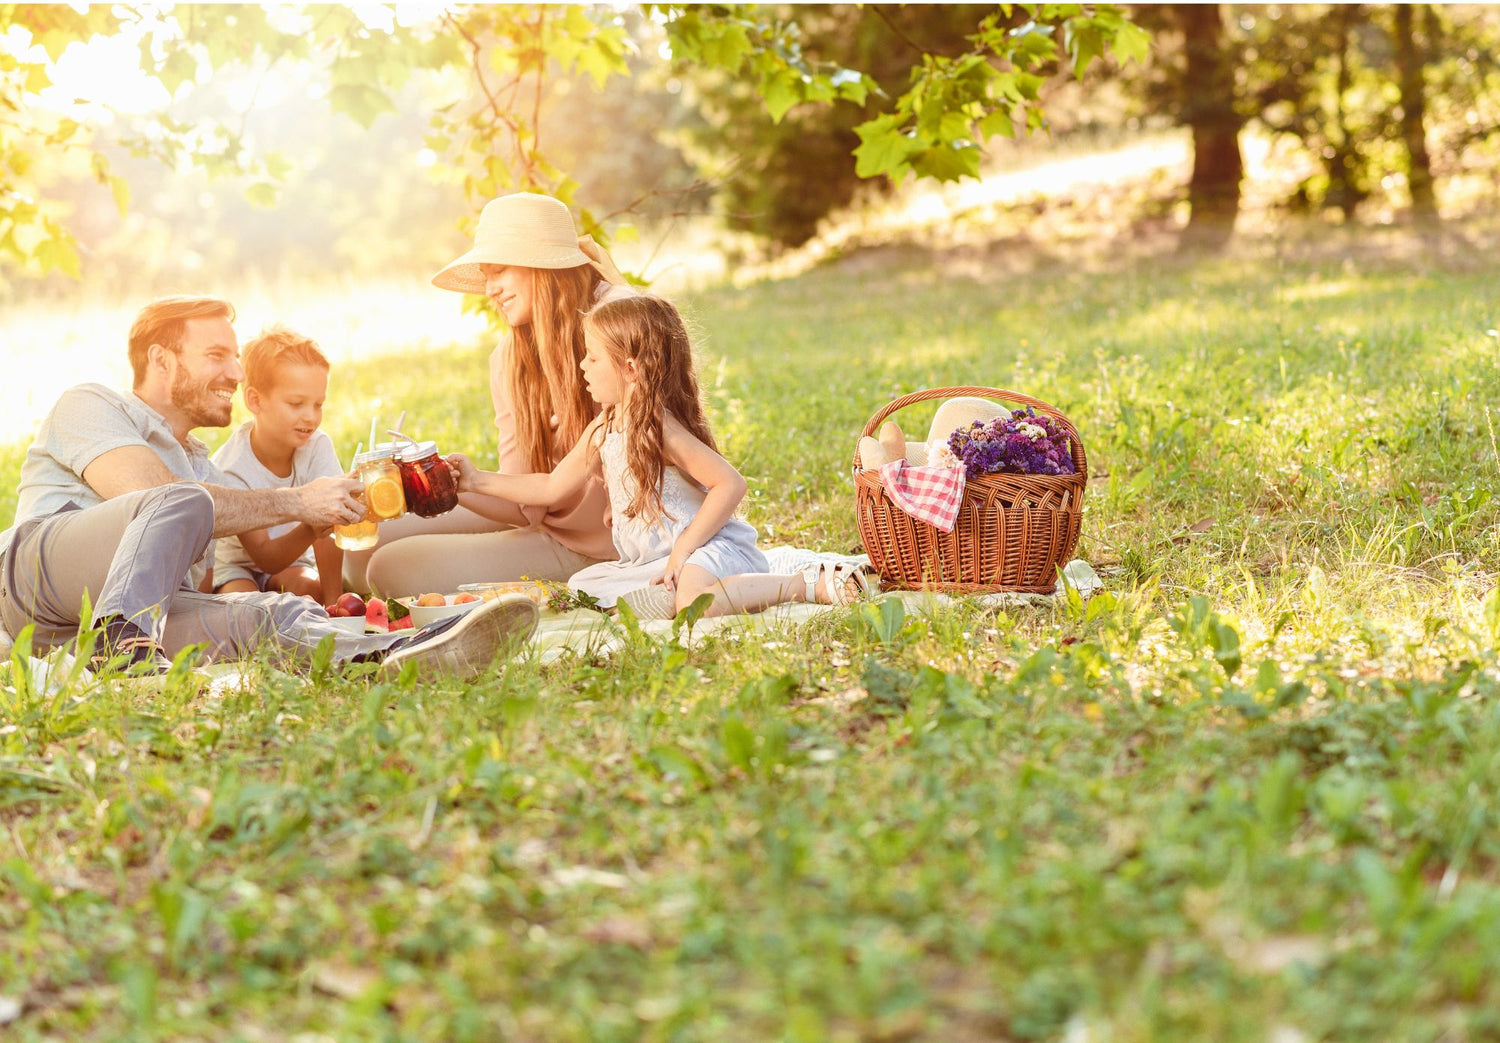 Picnic Fun: Packing the Perfect Family-Friendly Lunch